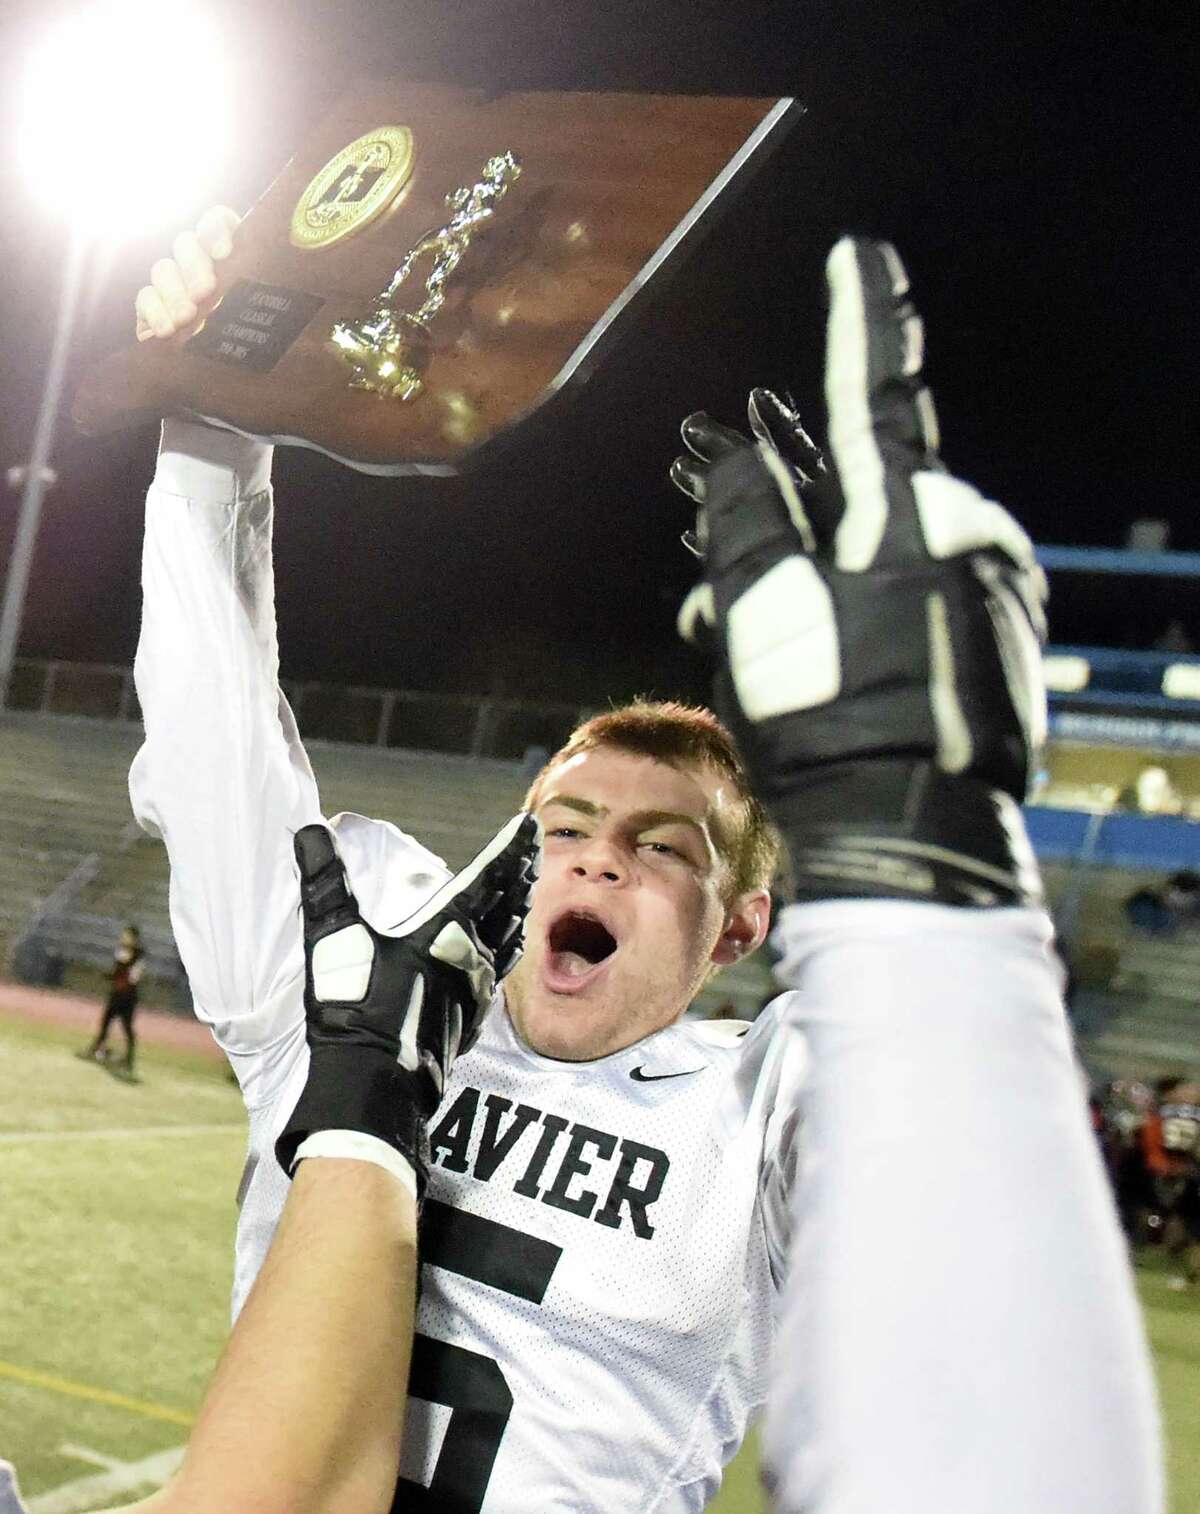 Michael Scherer holds the championship plaque after Xavier came from behind to stun second-seeded and previously unbeaten Shelton, 28-27 in the CIAC Class LL-Small final. (Photo Peter Hvizdak)